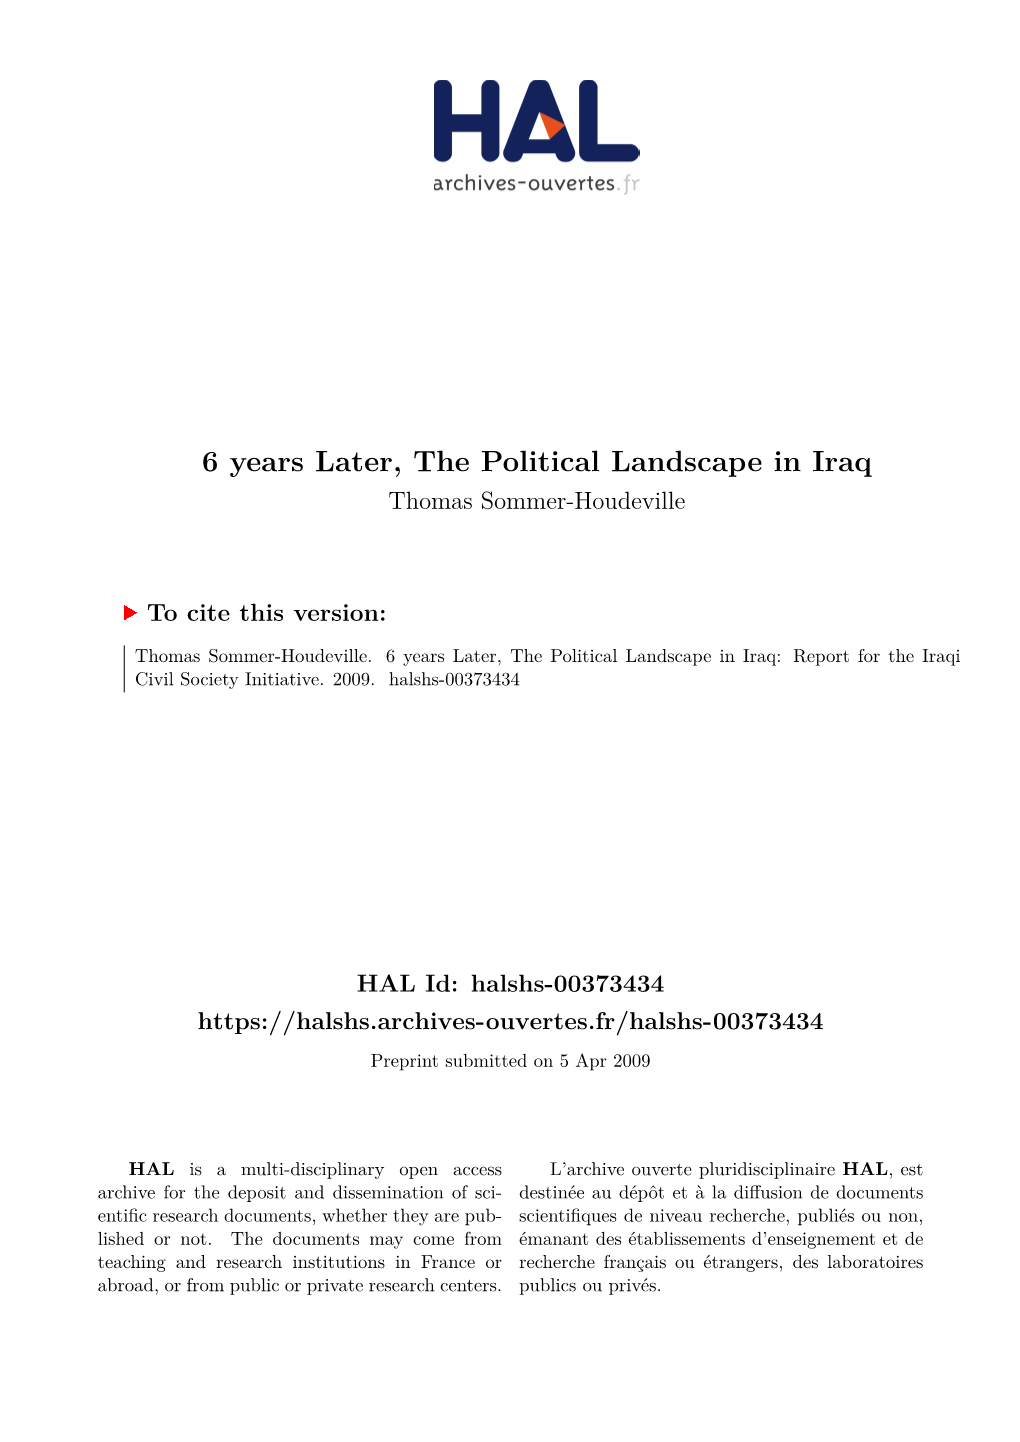 6 Years Later, the Political Landscape in Iraq Thomas Sommer-Houdeville